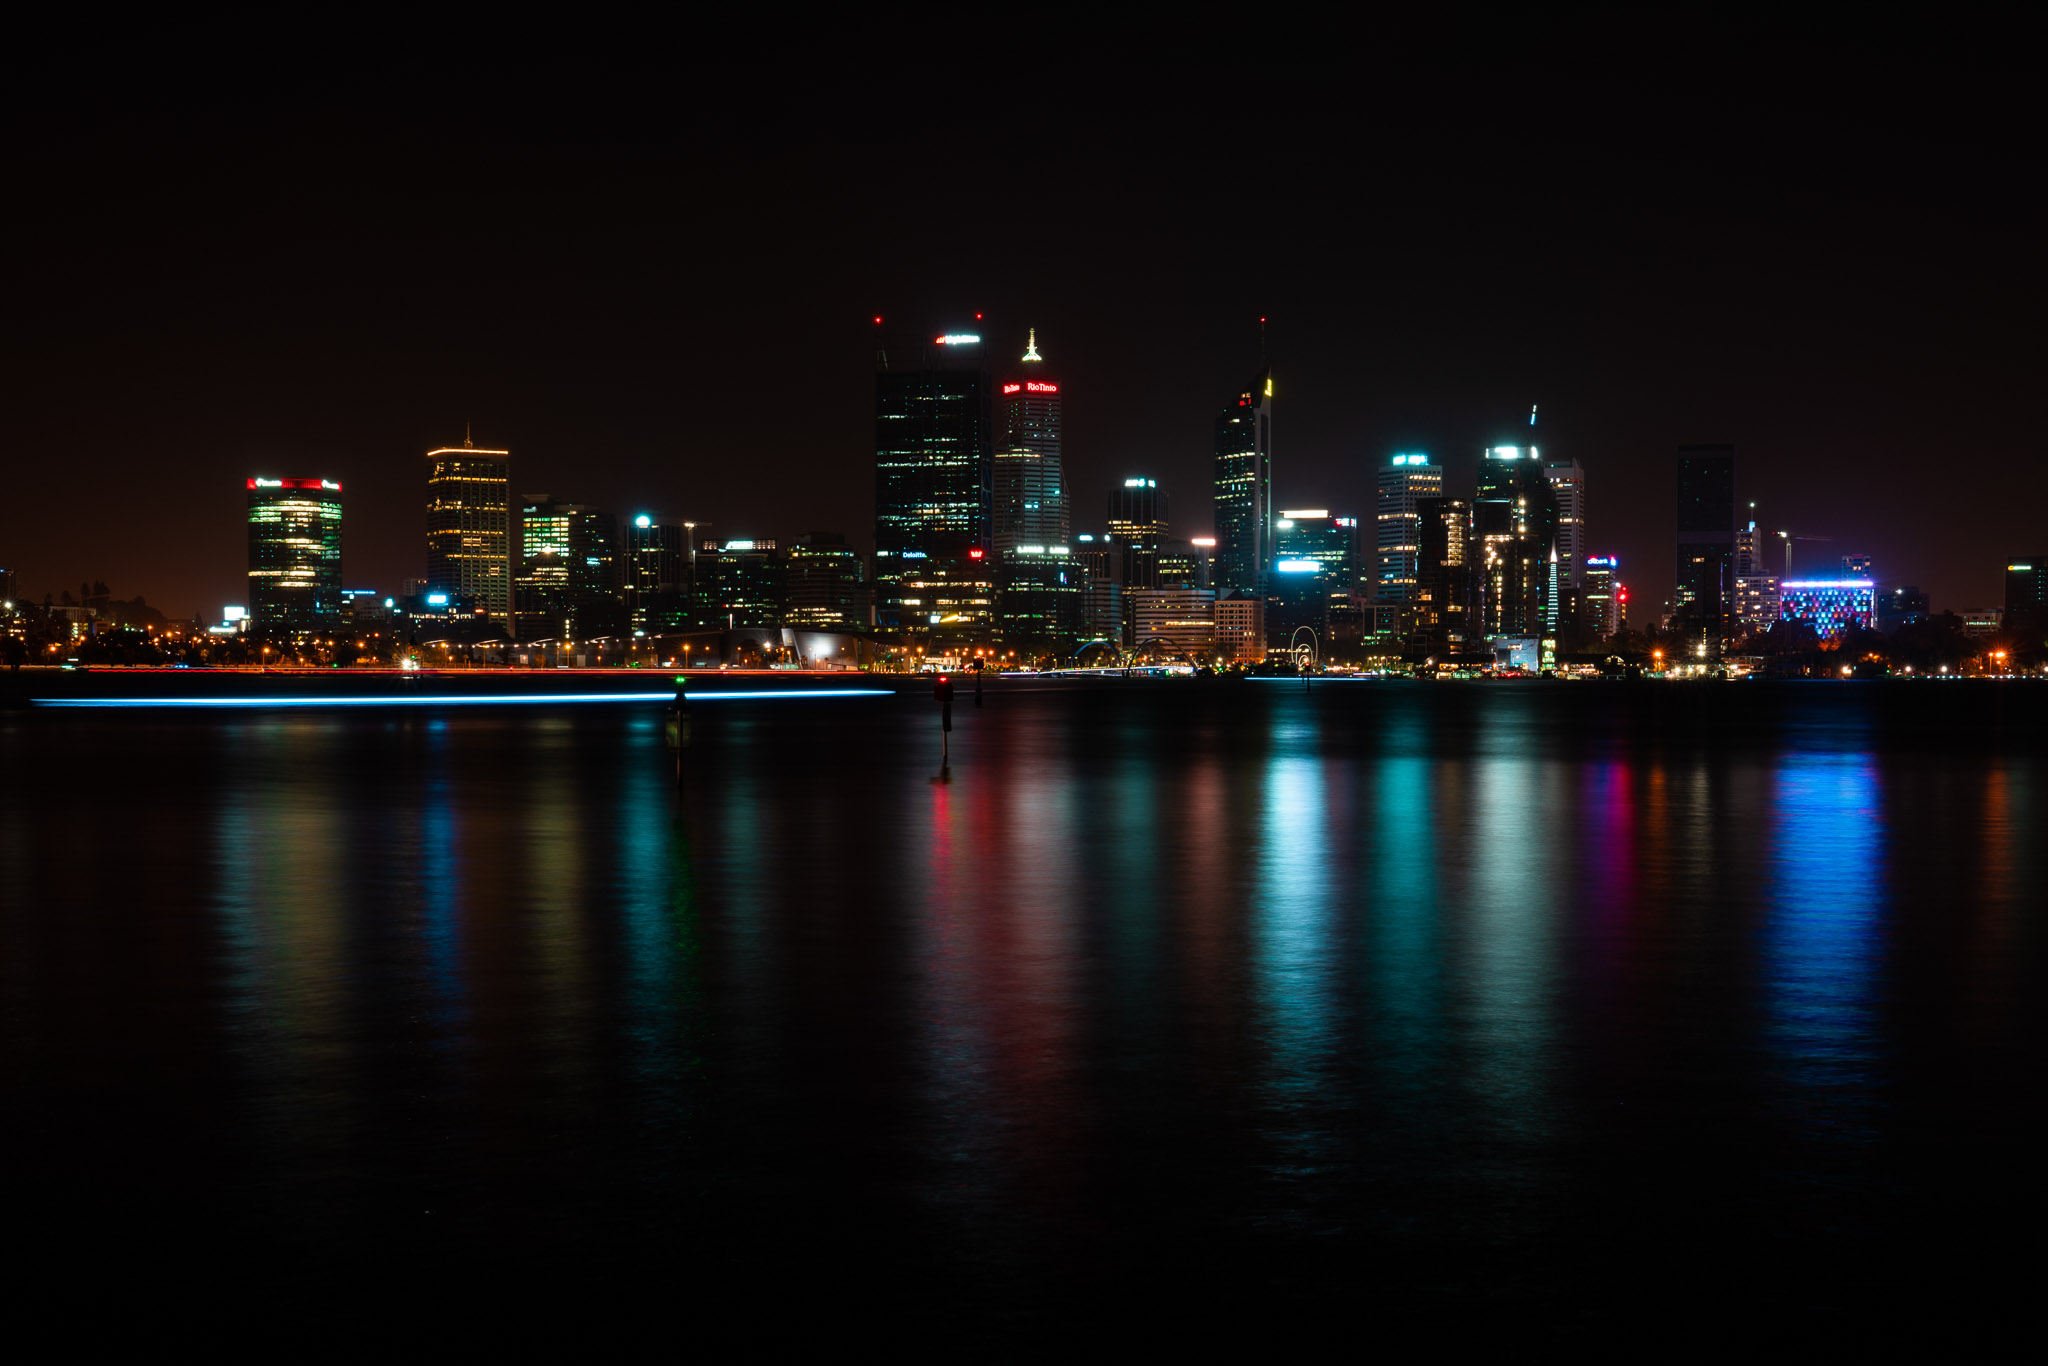 Perth (City) Photography Workshop - Day & Night